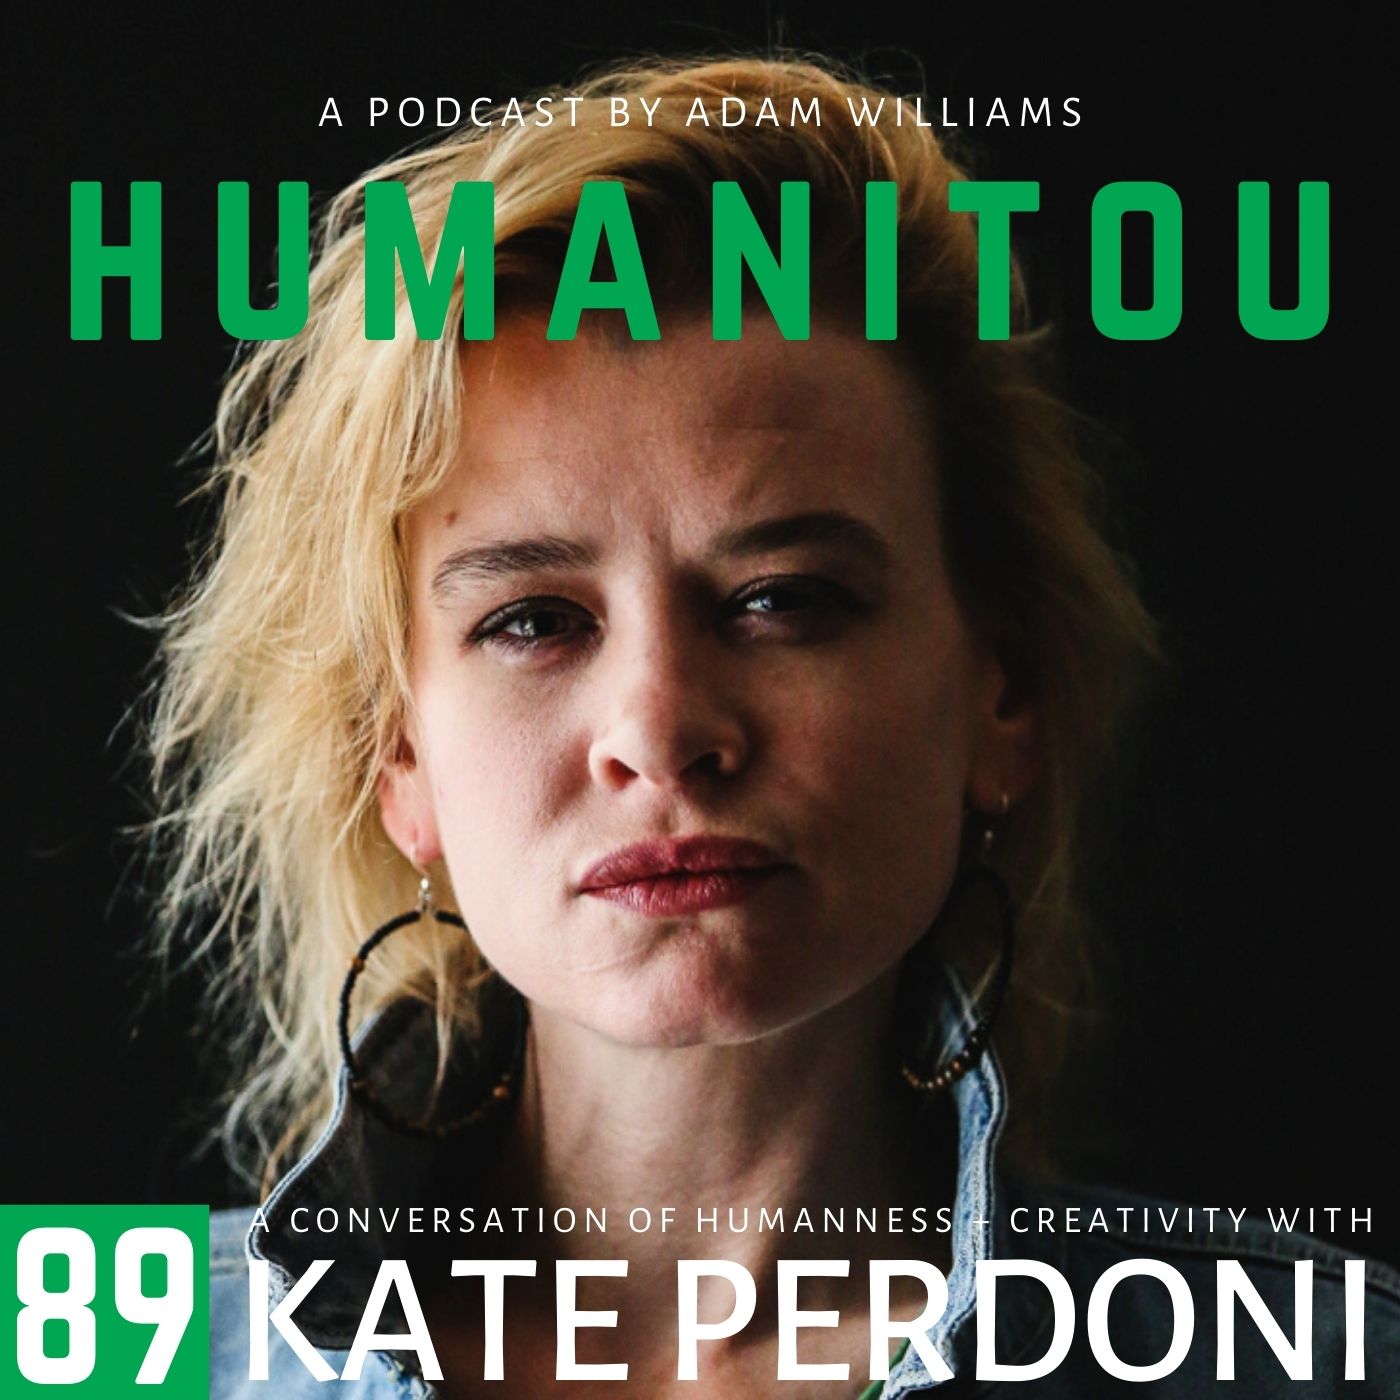 89: Kate Perdoni, musician and journalist, on self-validation, following one's calling, exploring curiosity and a definition of God